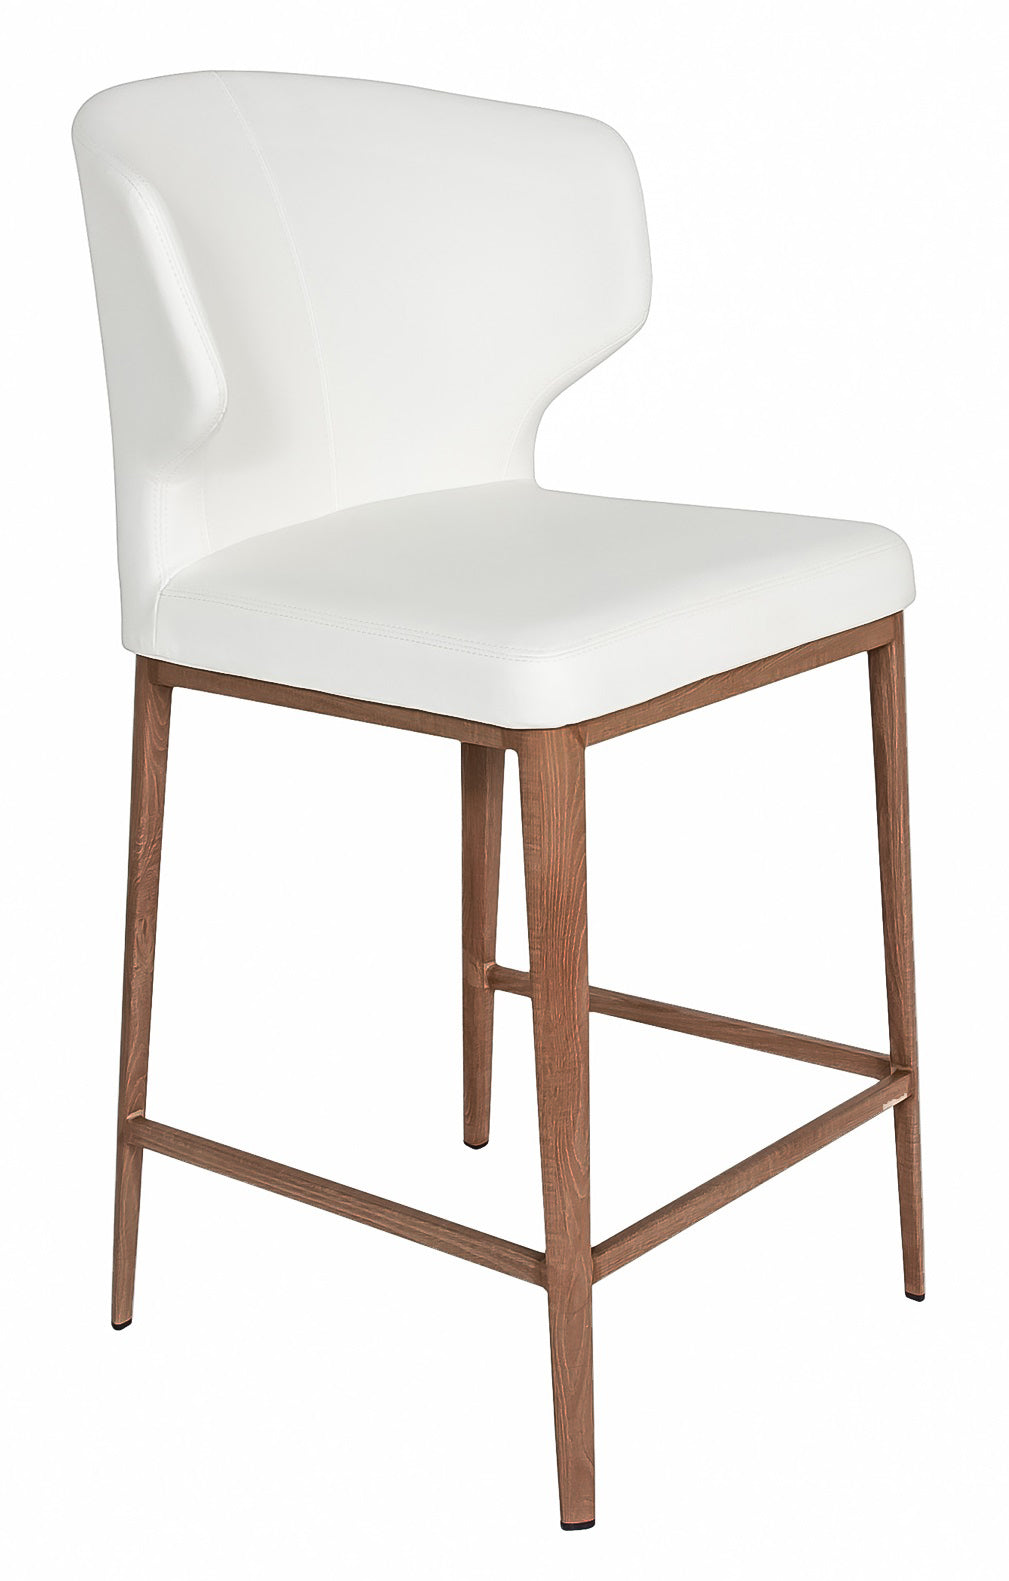 Bow Leather Bar Stool - White with Wooden Base